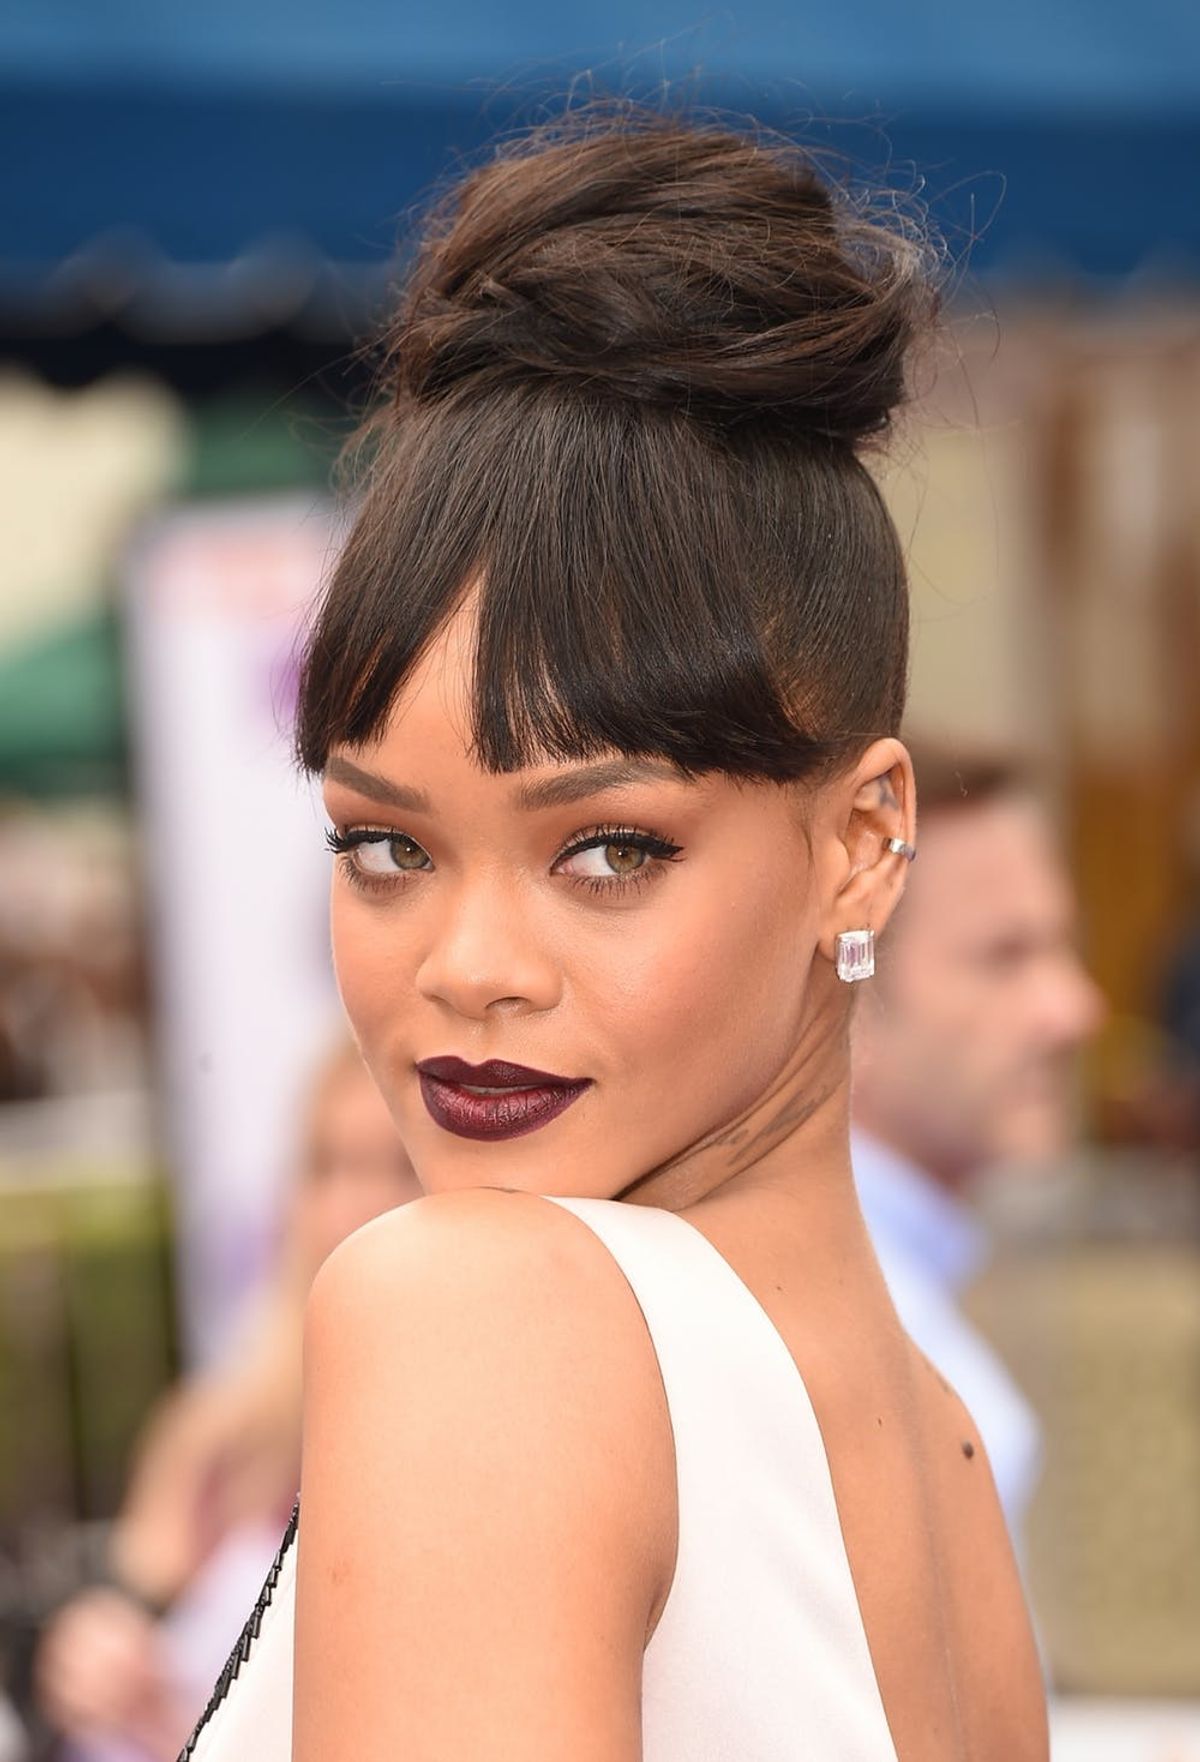 5 Celeb-Approved Ballerina Buns Worn by Rihanna, Shay Mitchell, and More